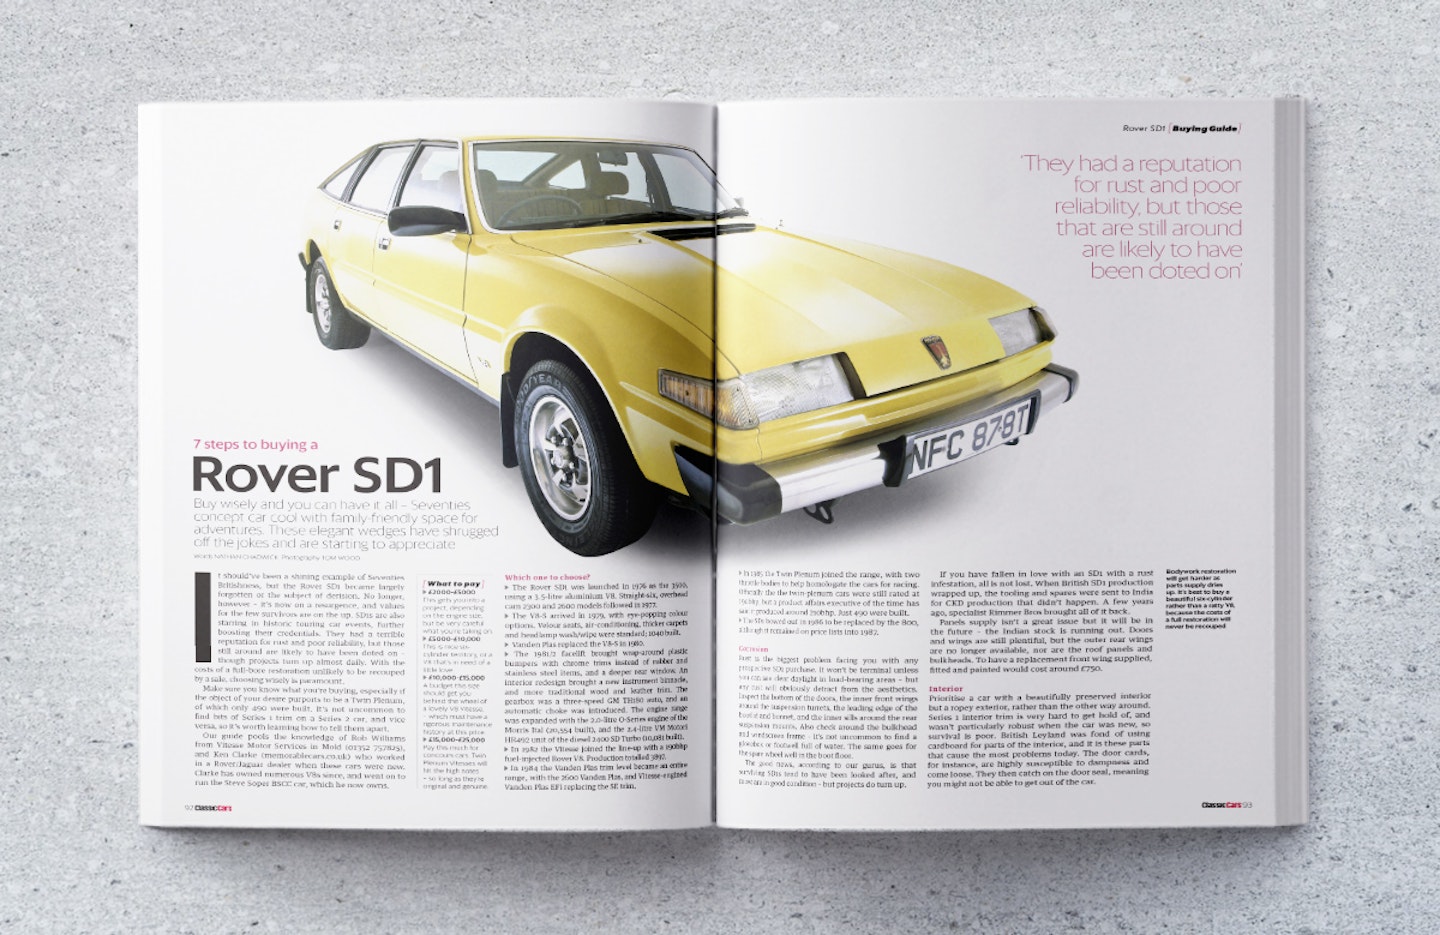 Rover SD1 buying guide